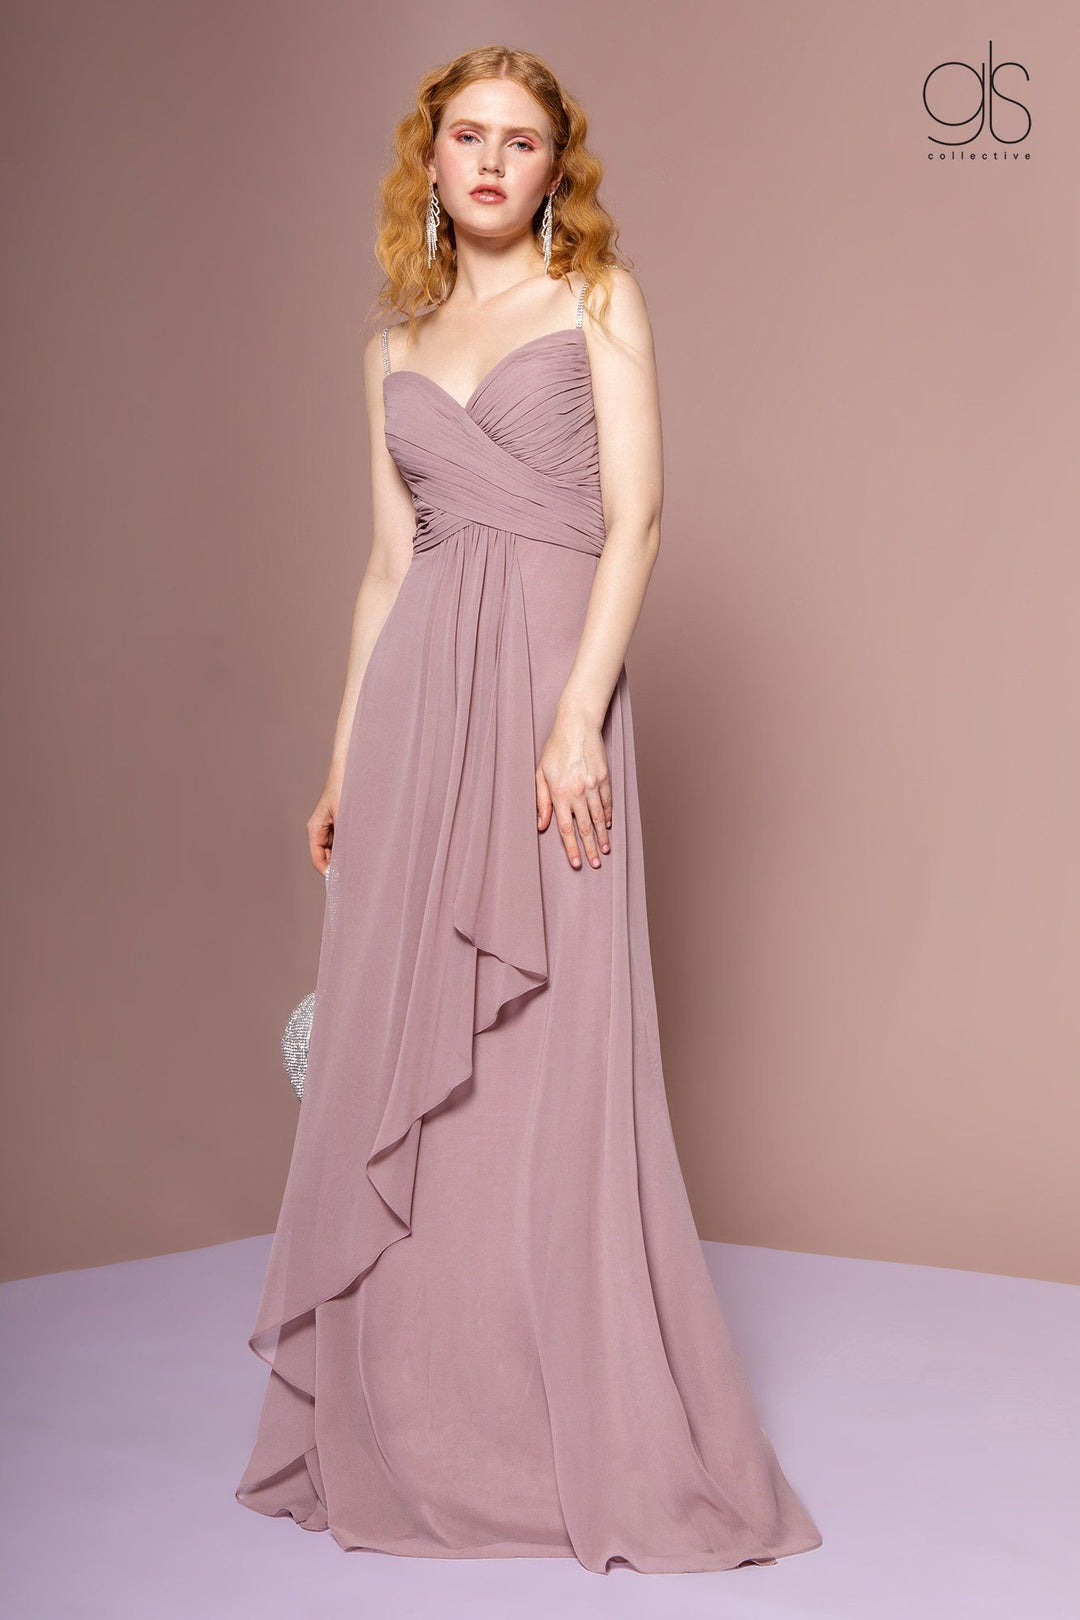 Long A-line Sleeveless Dress with Ruched Bodice by Elizabeth K GL2666-Long Formal Dresses-ABC Fashion